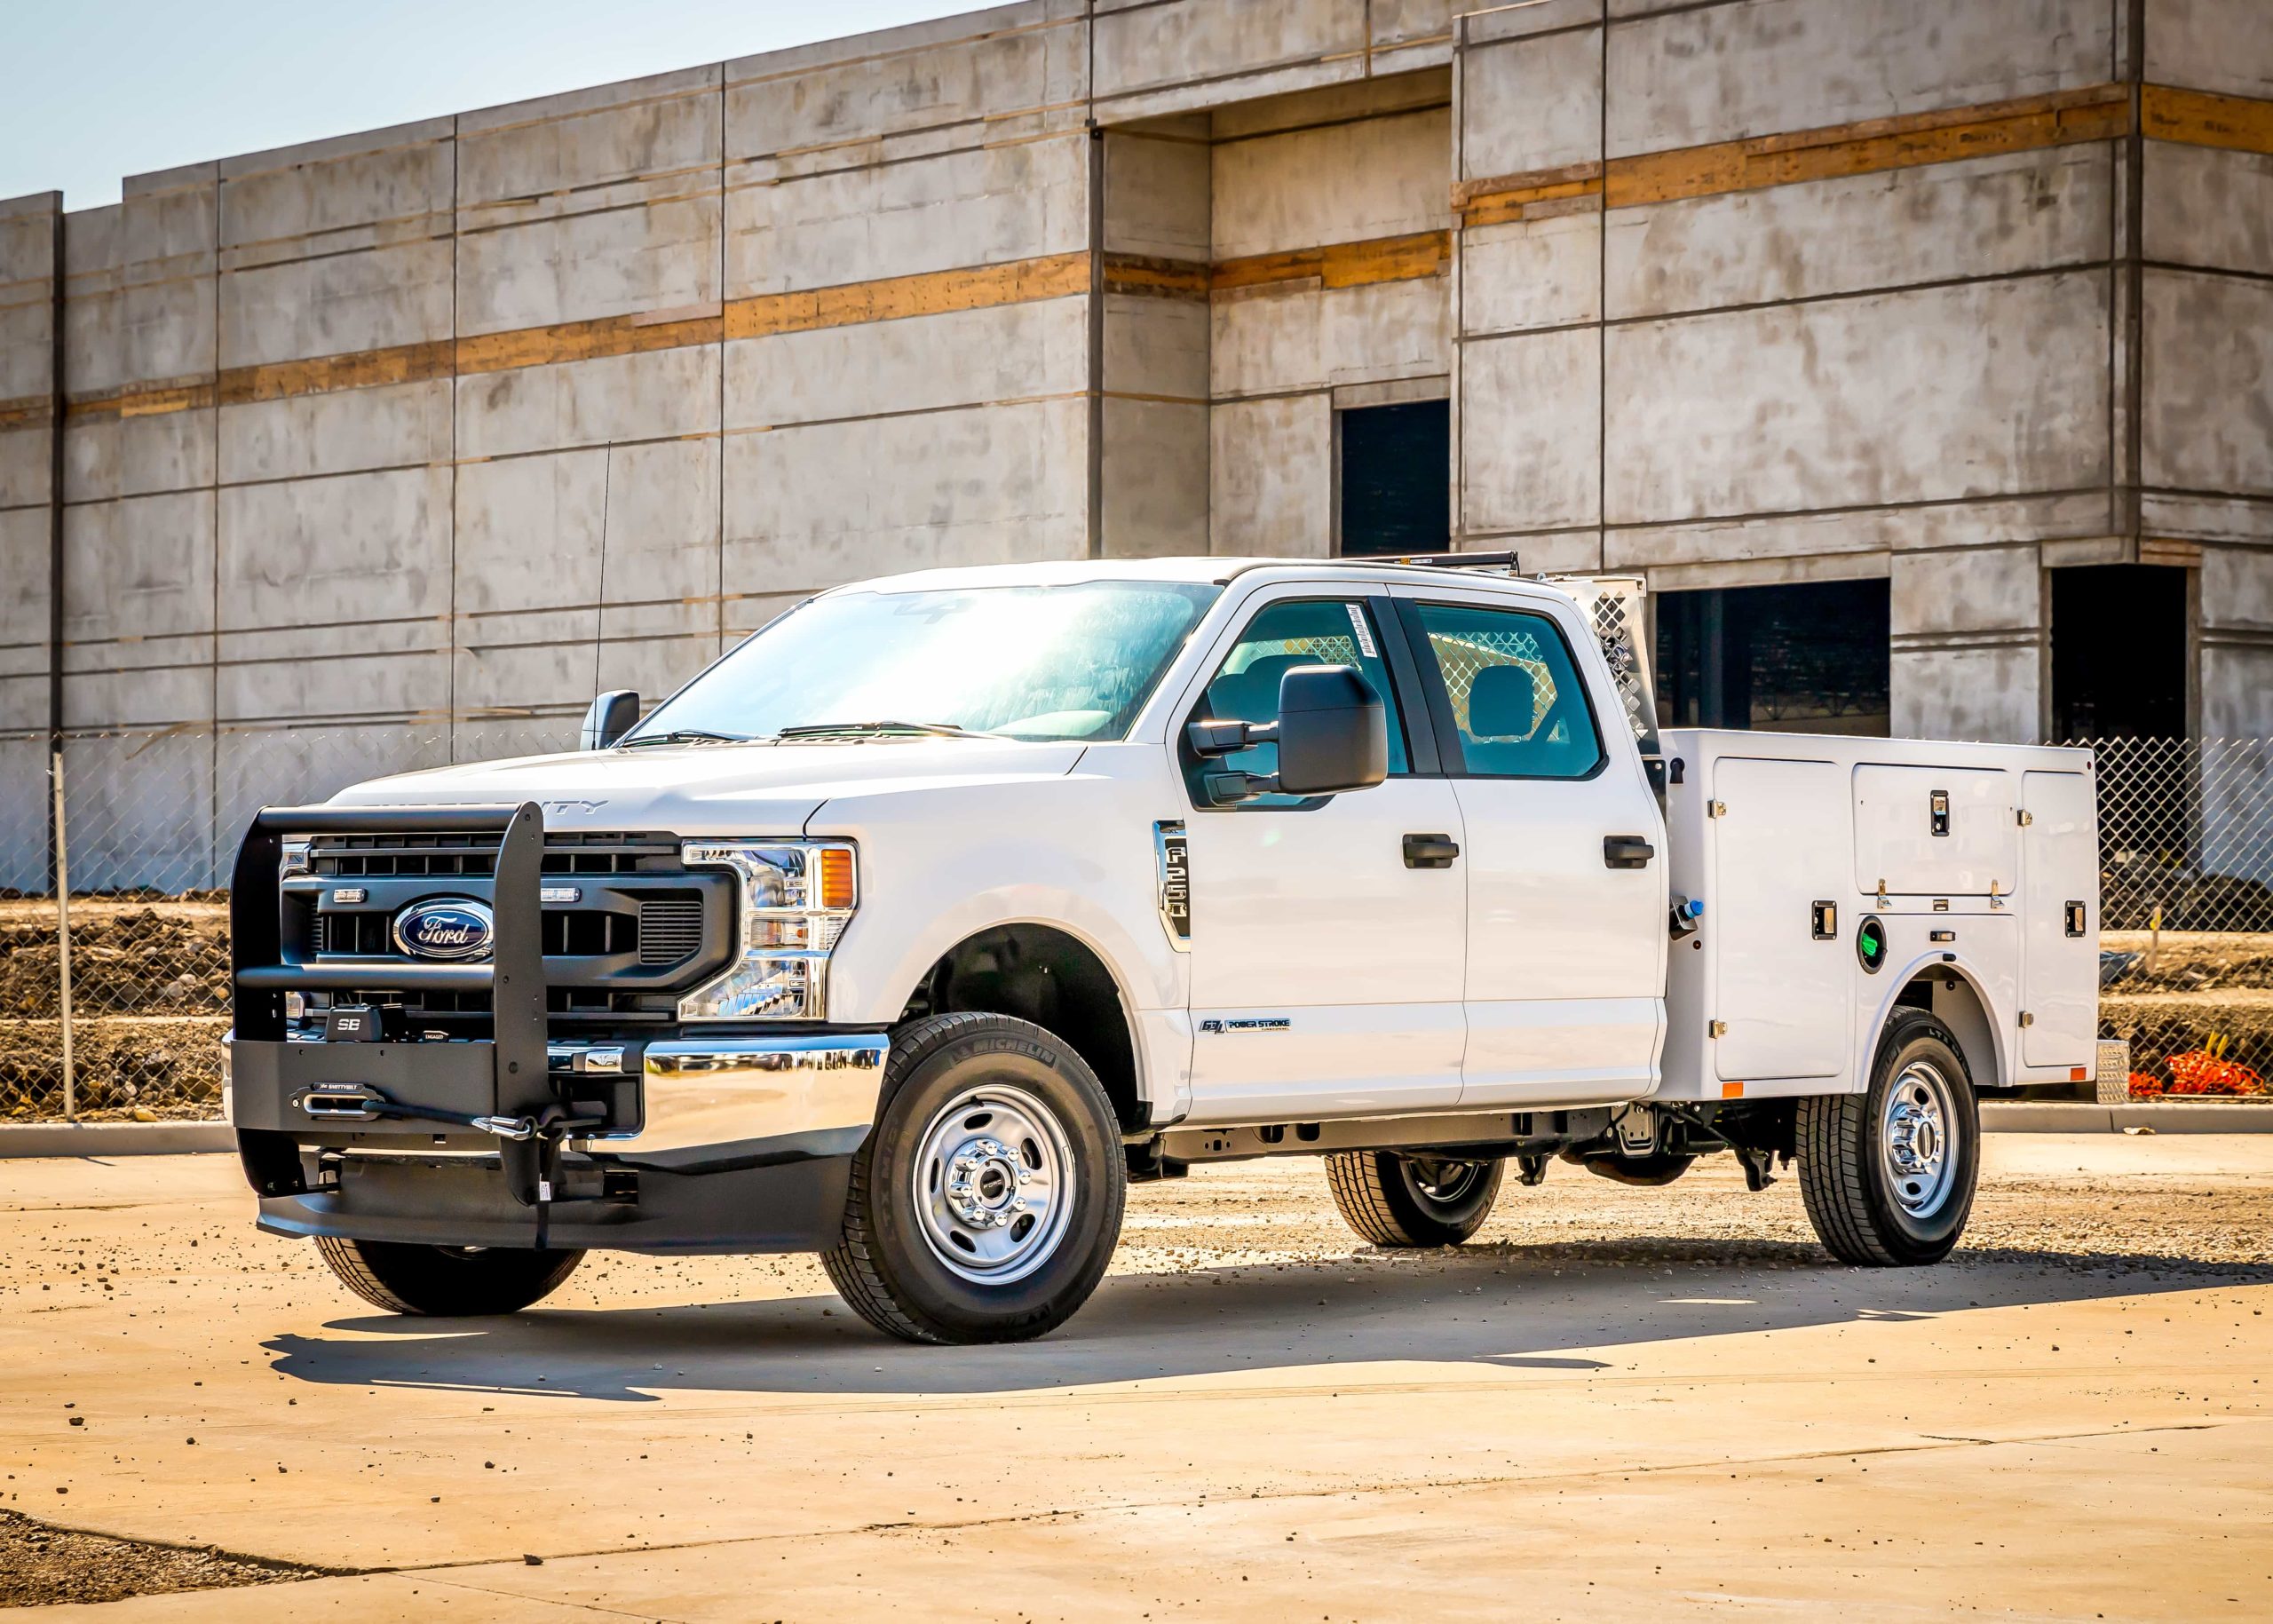 Redefining the truck body industry - The Municipal